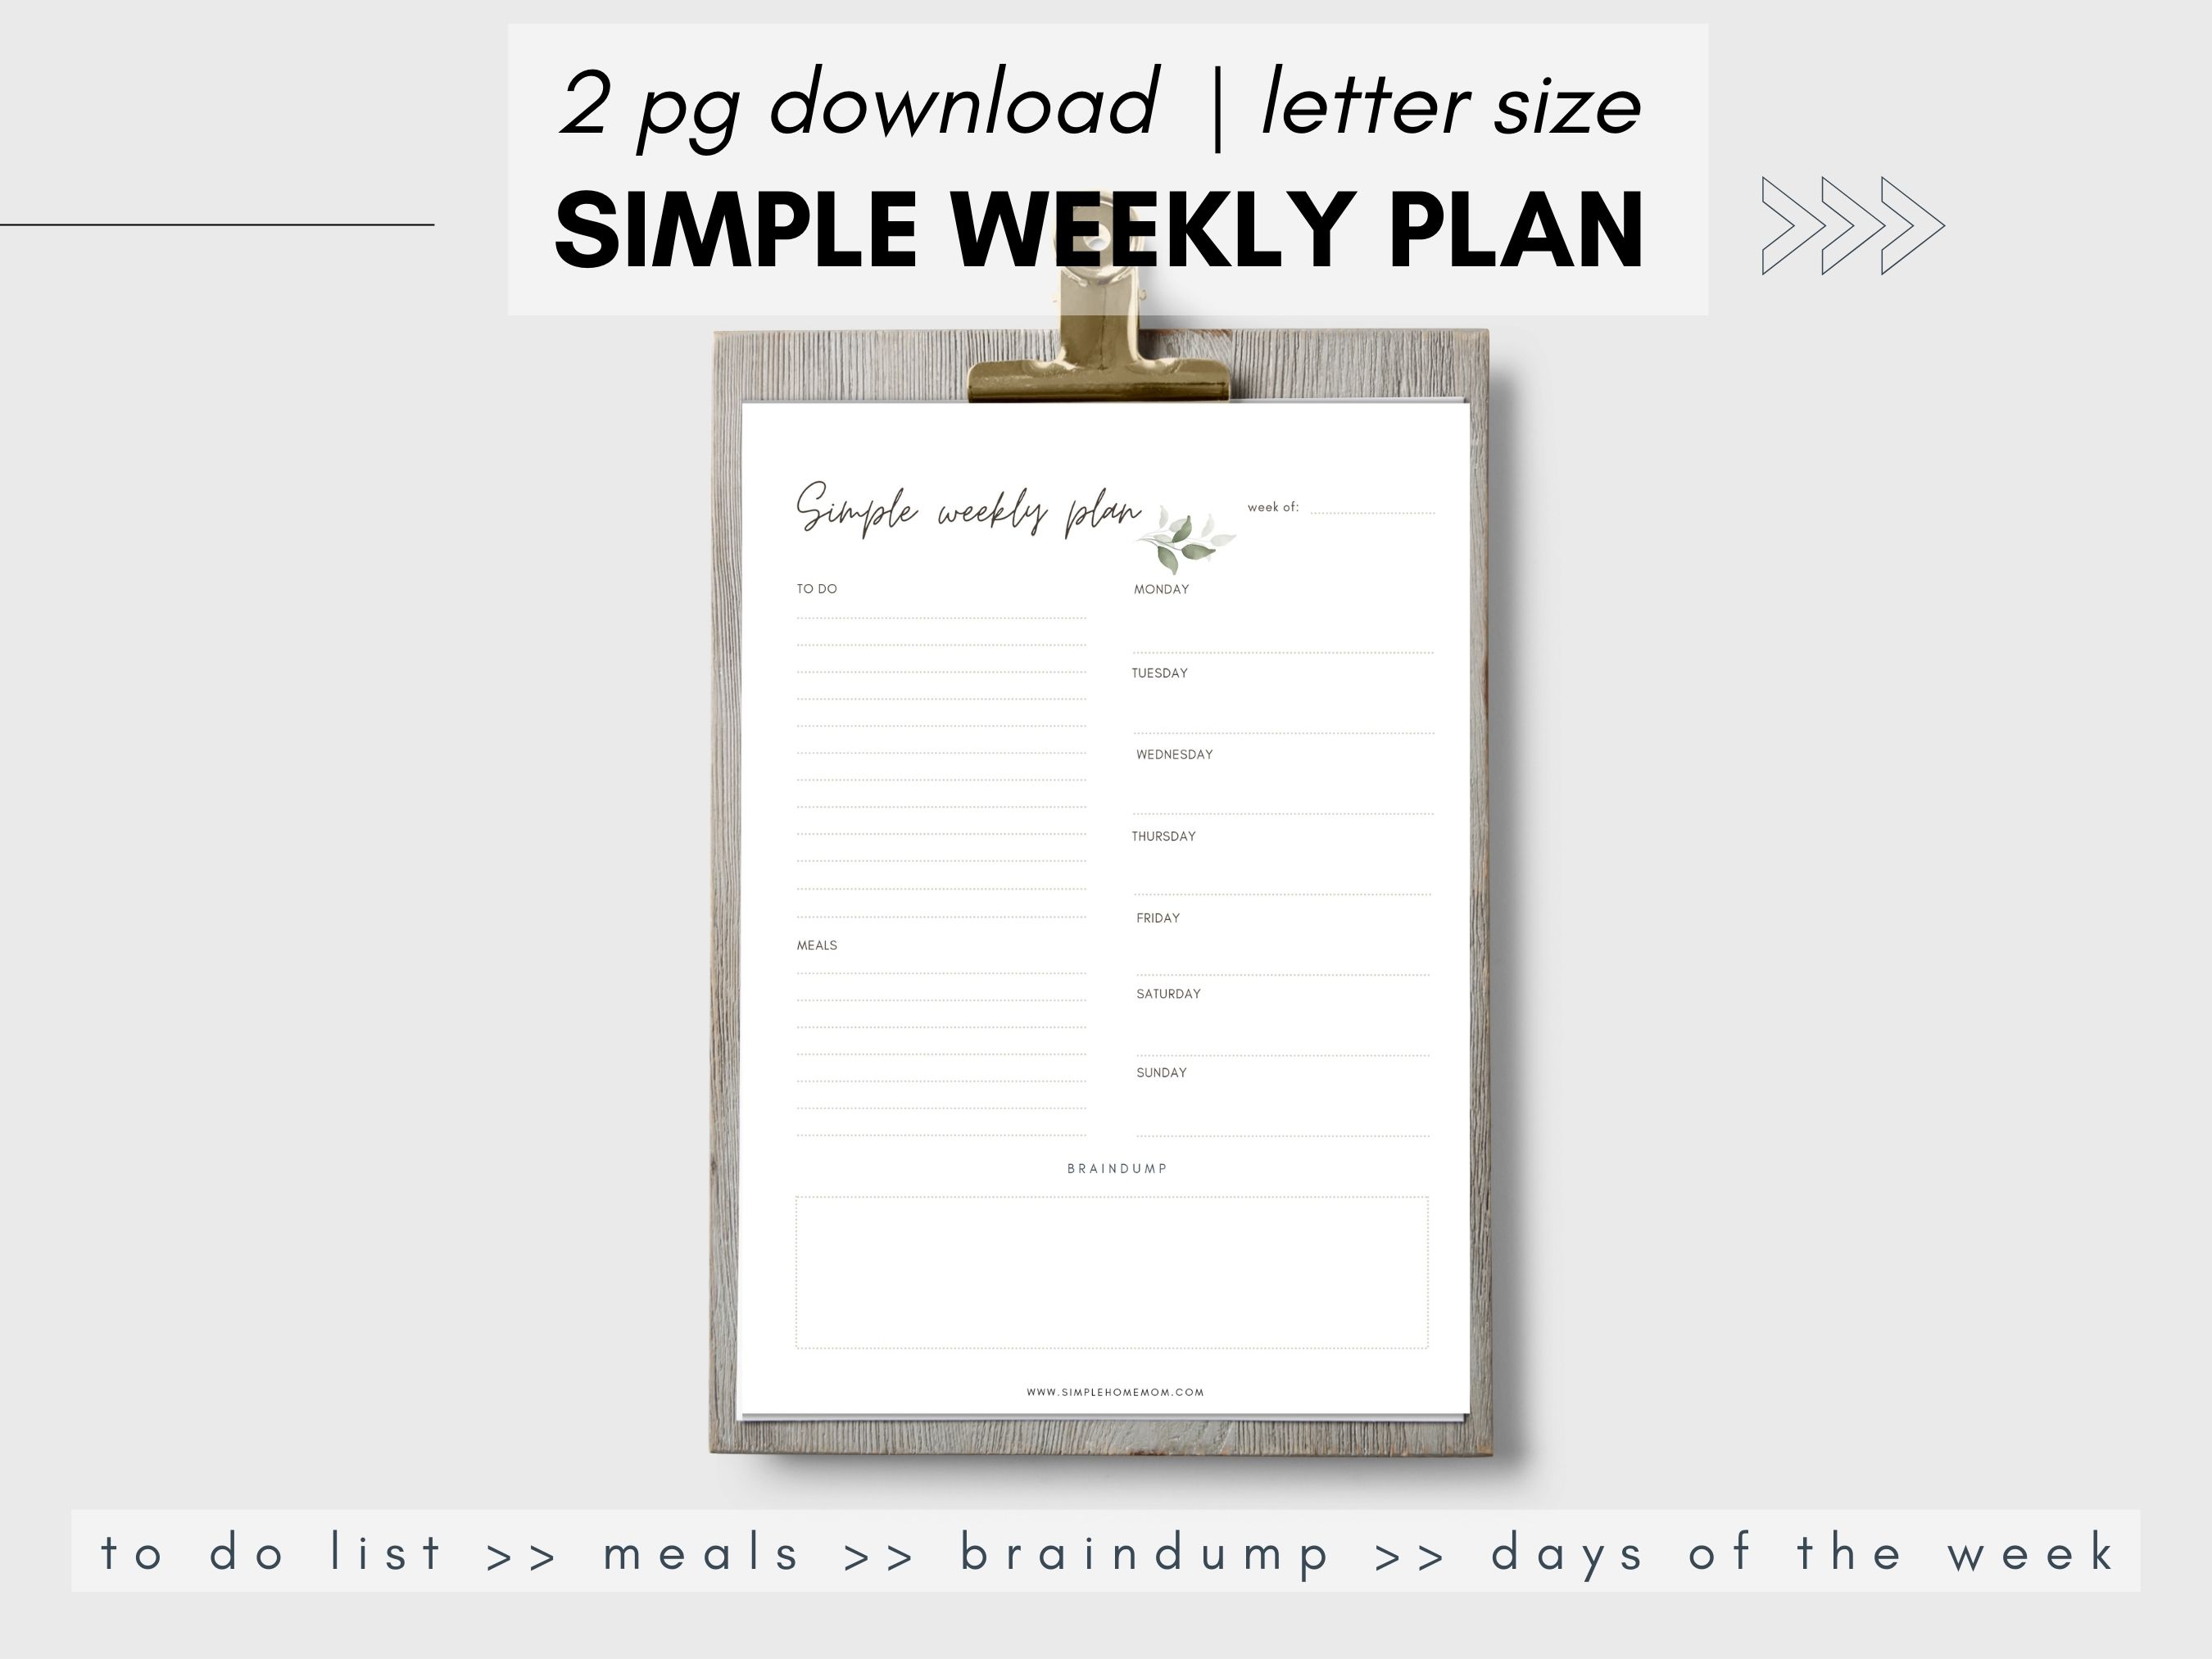 My Simple Weekly Plan graphic